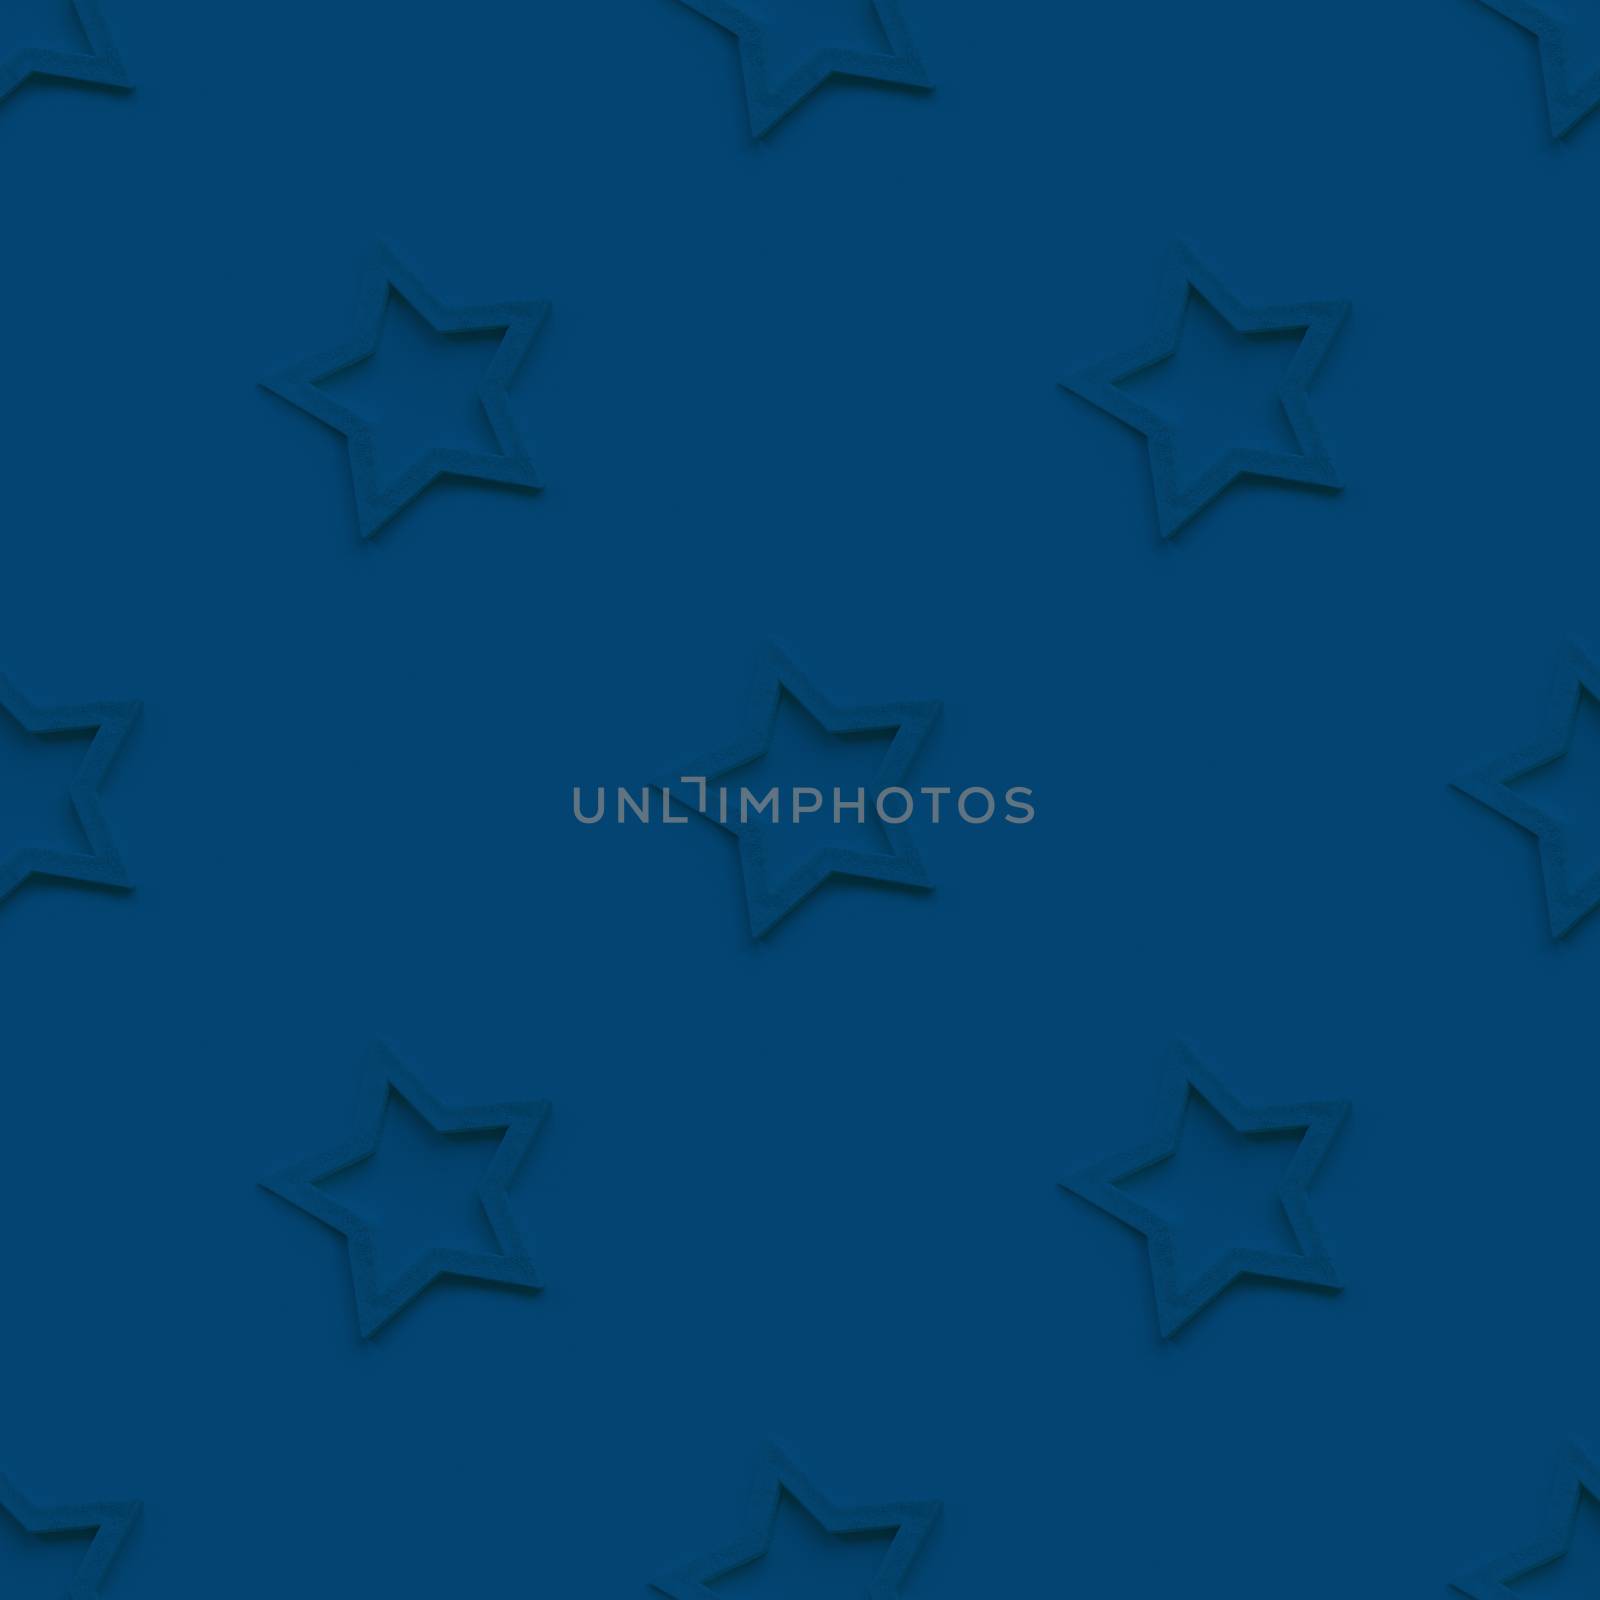 Seamless photo pattern with decorative stars. Christmas decorations on classic blue background.